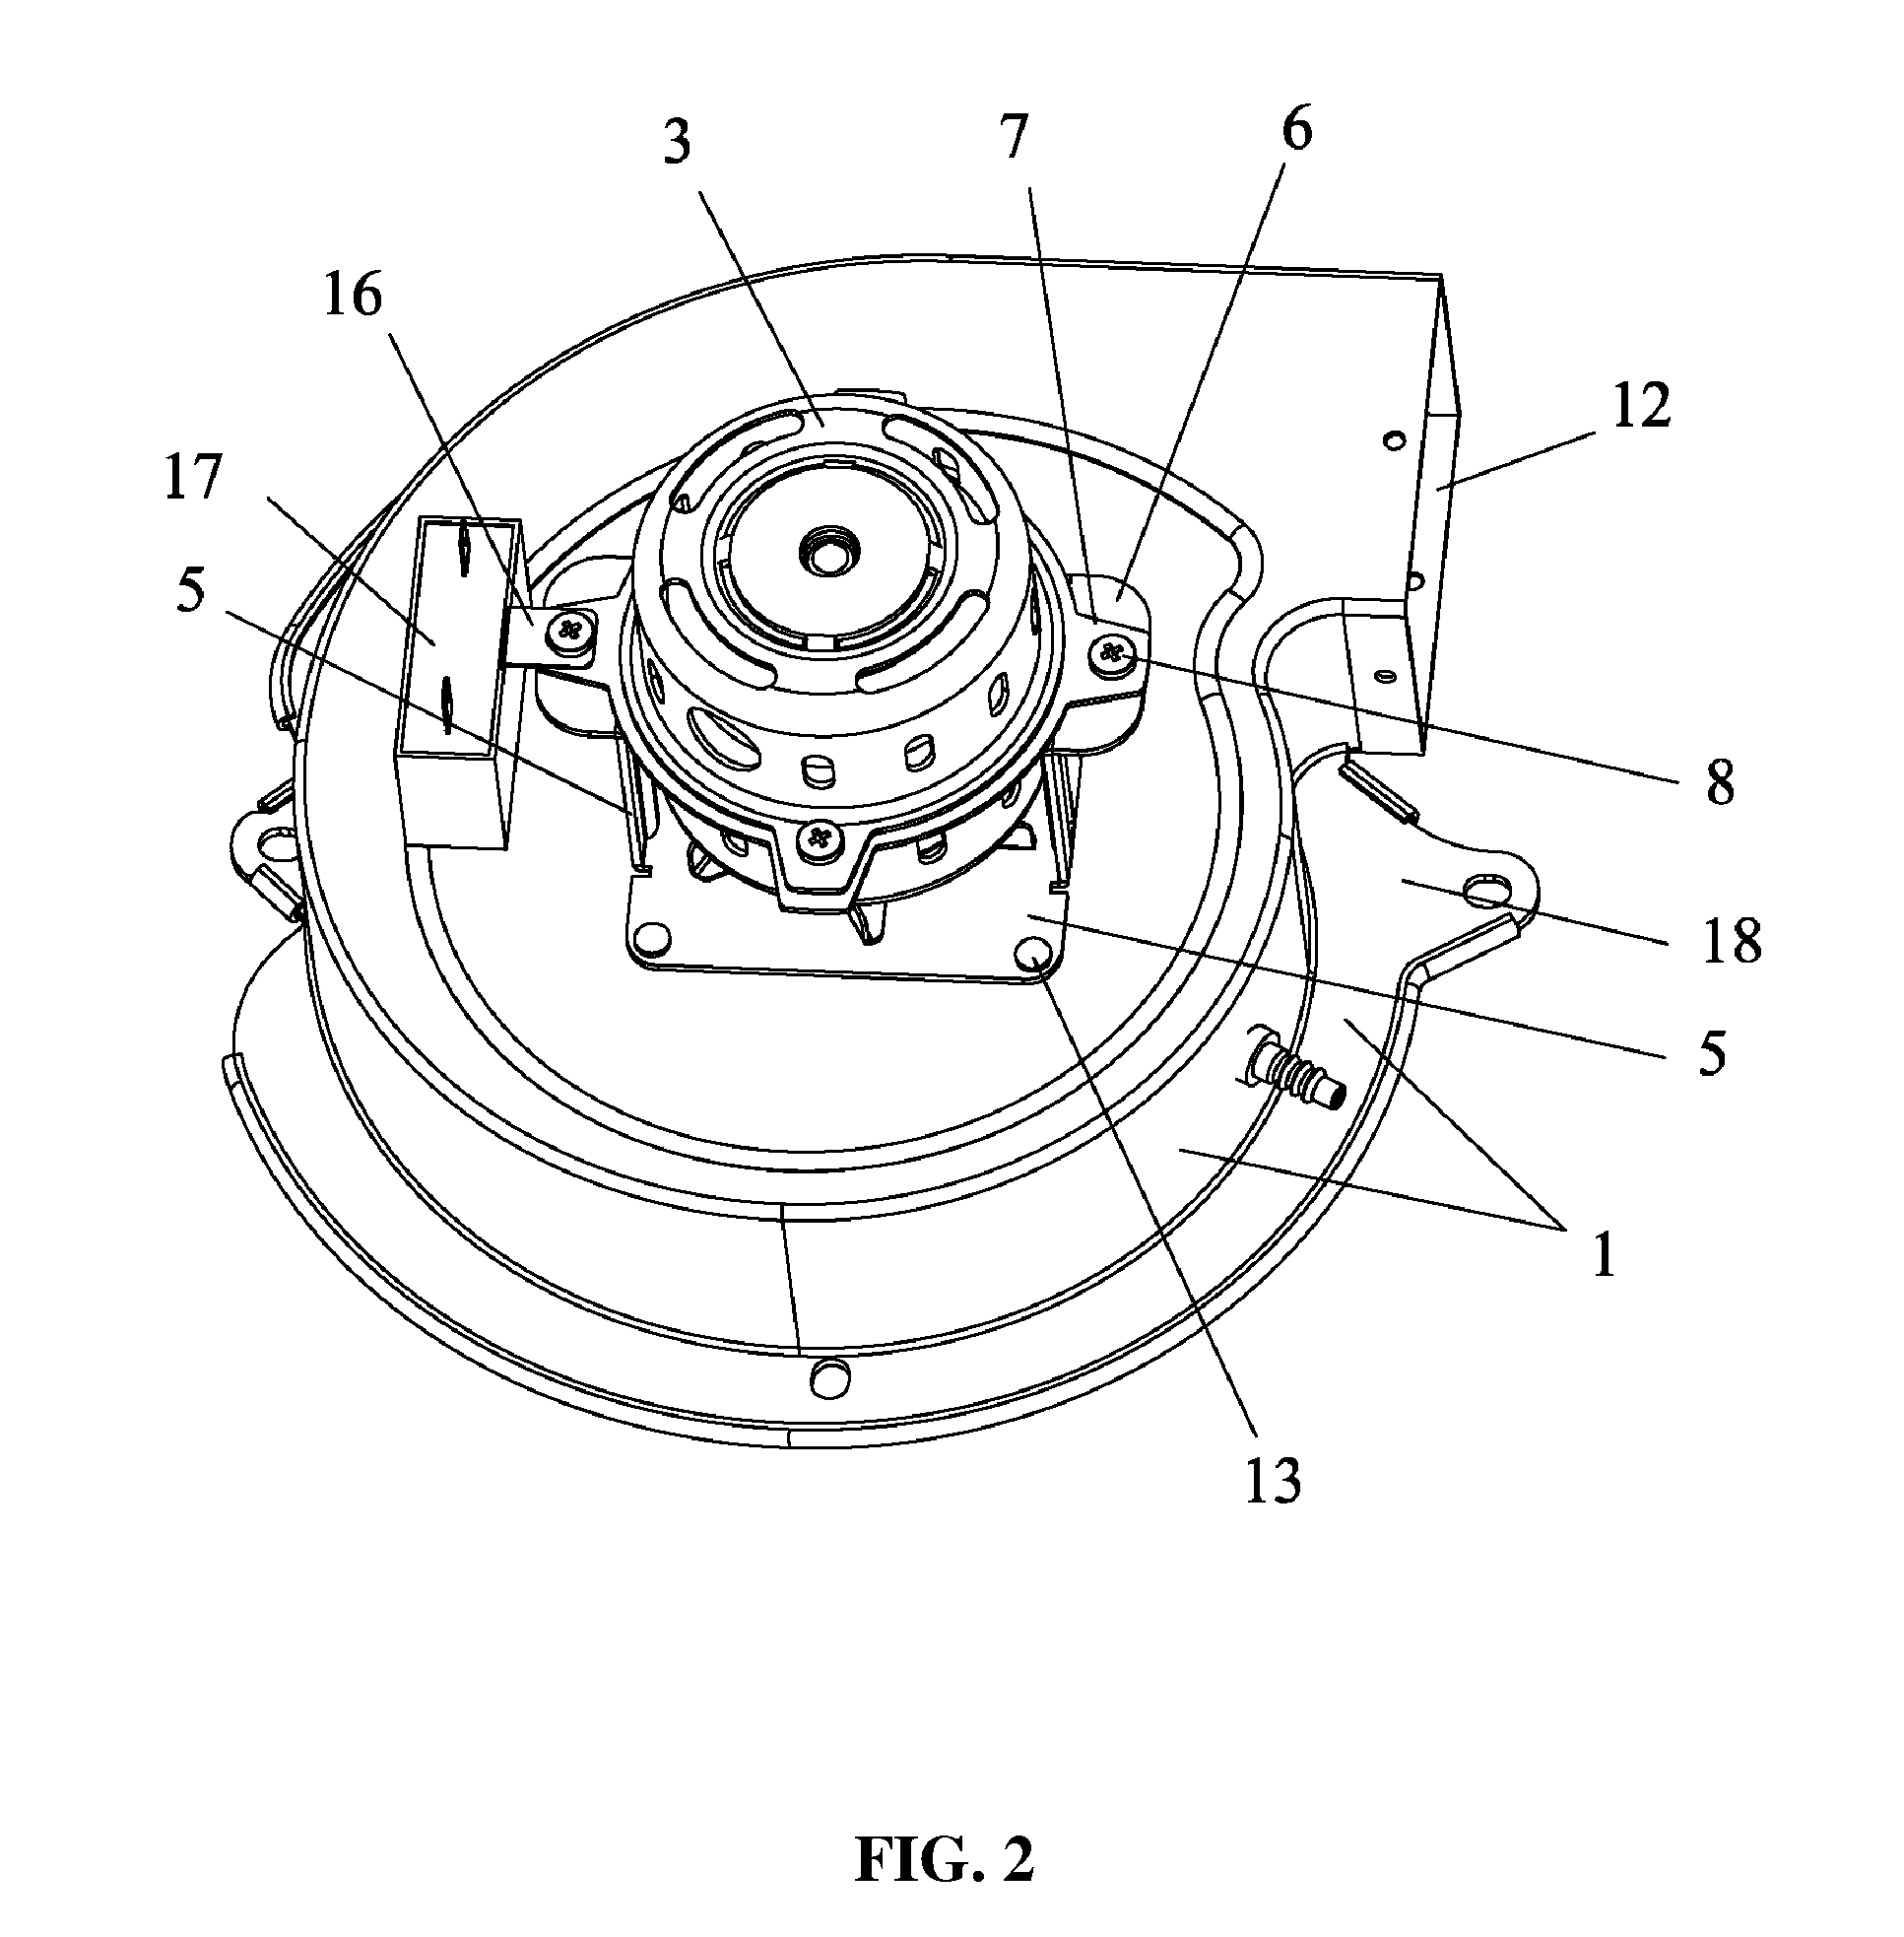 Blower, housing and wind wheel thereof